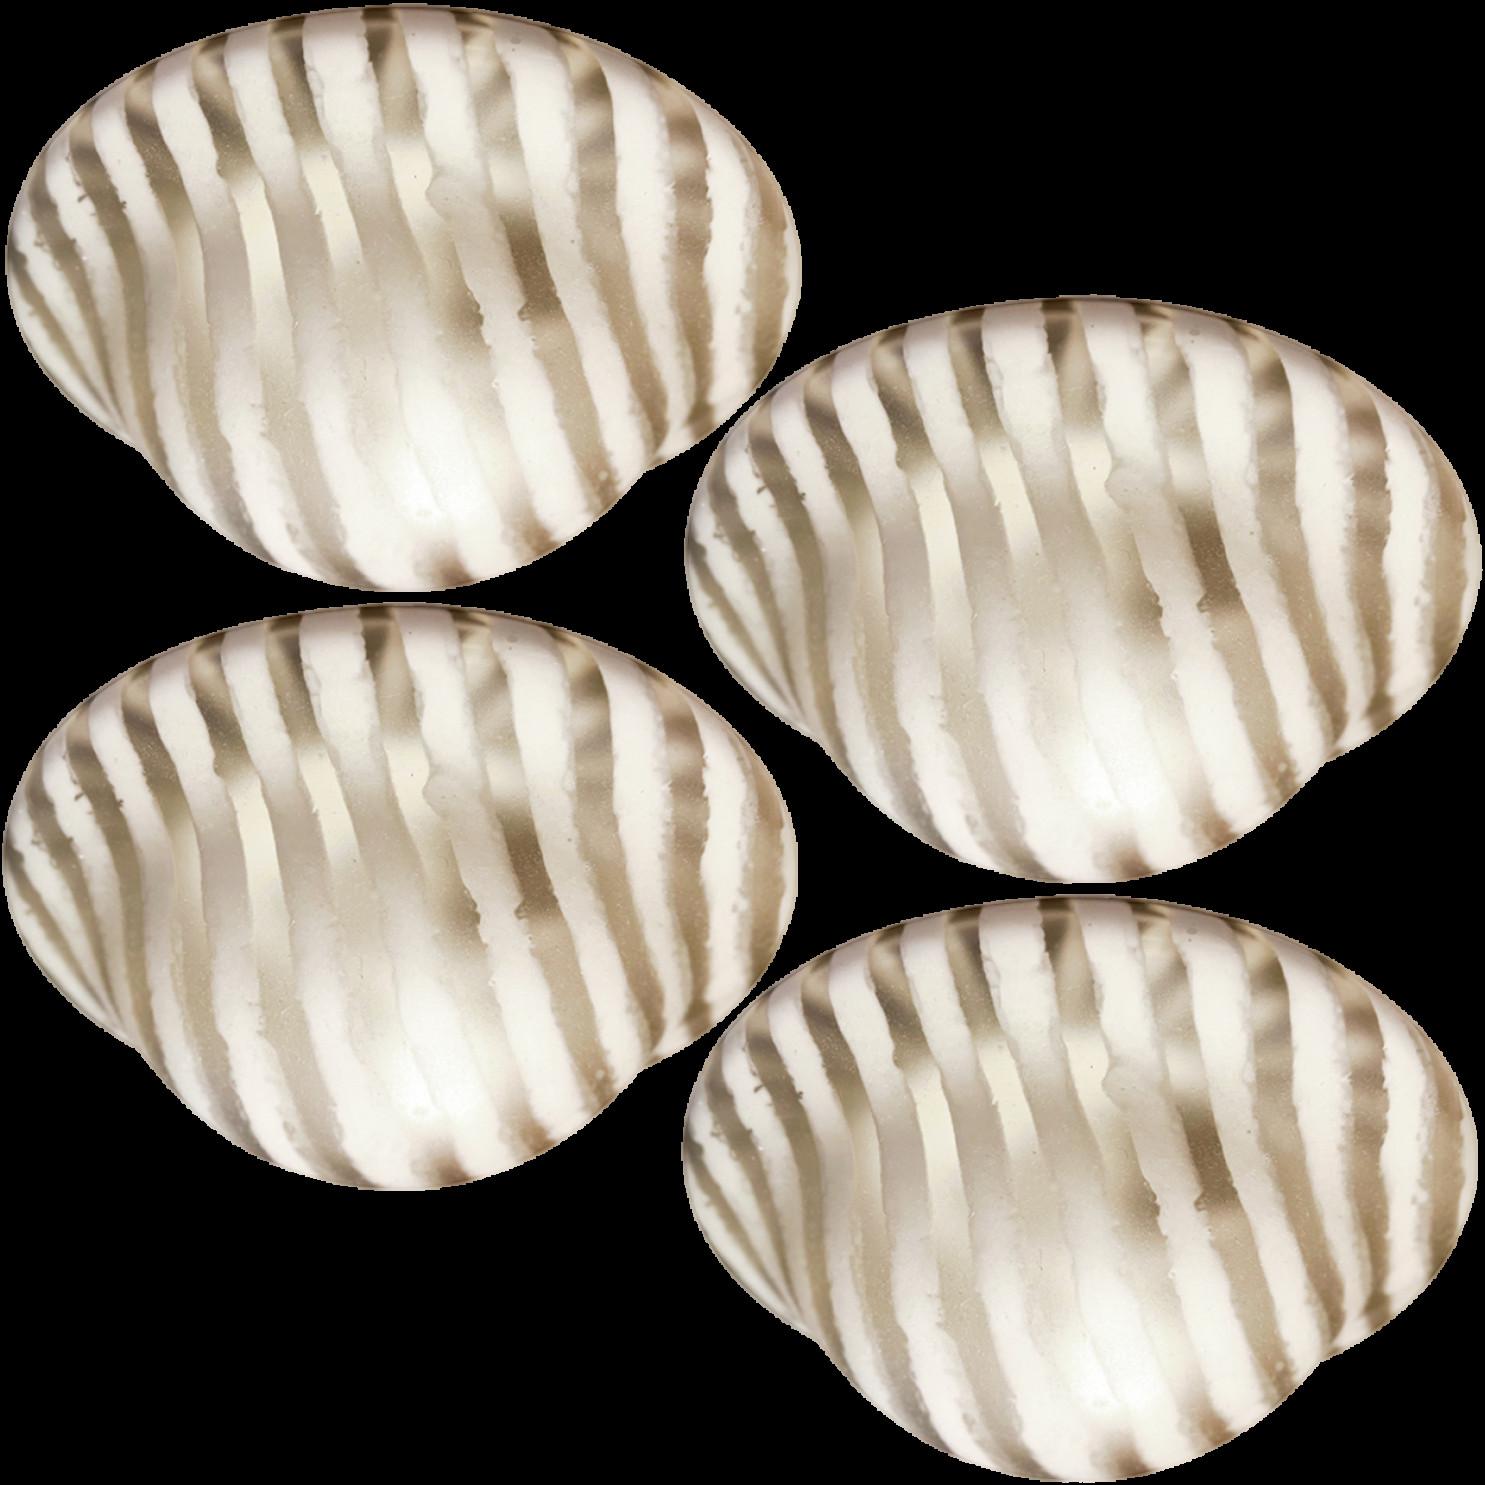 Four beautiful mid-20th century modernist flush mounts by Peill & Putzler. Made around 1970 in Germany, Europe. Featuring a large zebra-striped glass shade with clear and white stripes. The light illuminates wonderful.

The lights can also be used